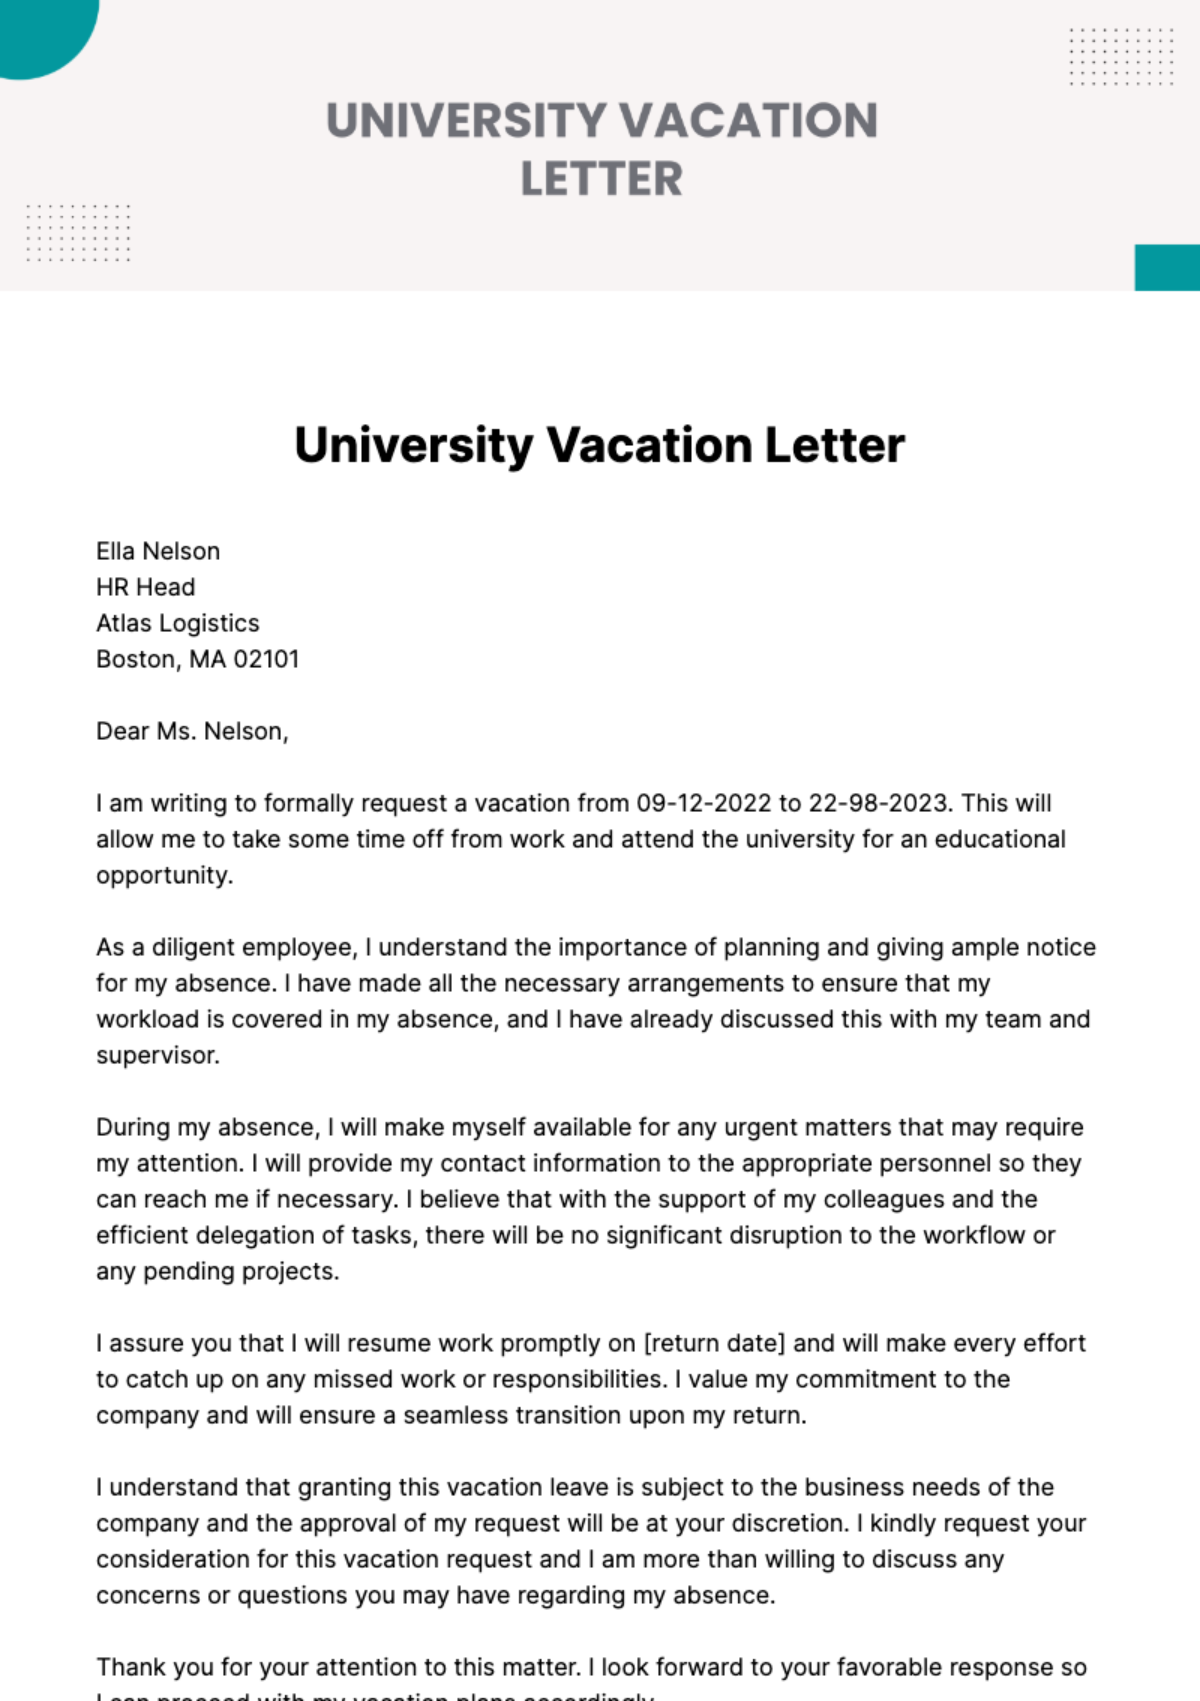 University Vacation Letter Template